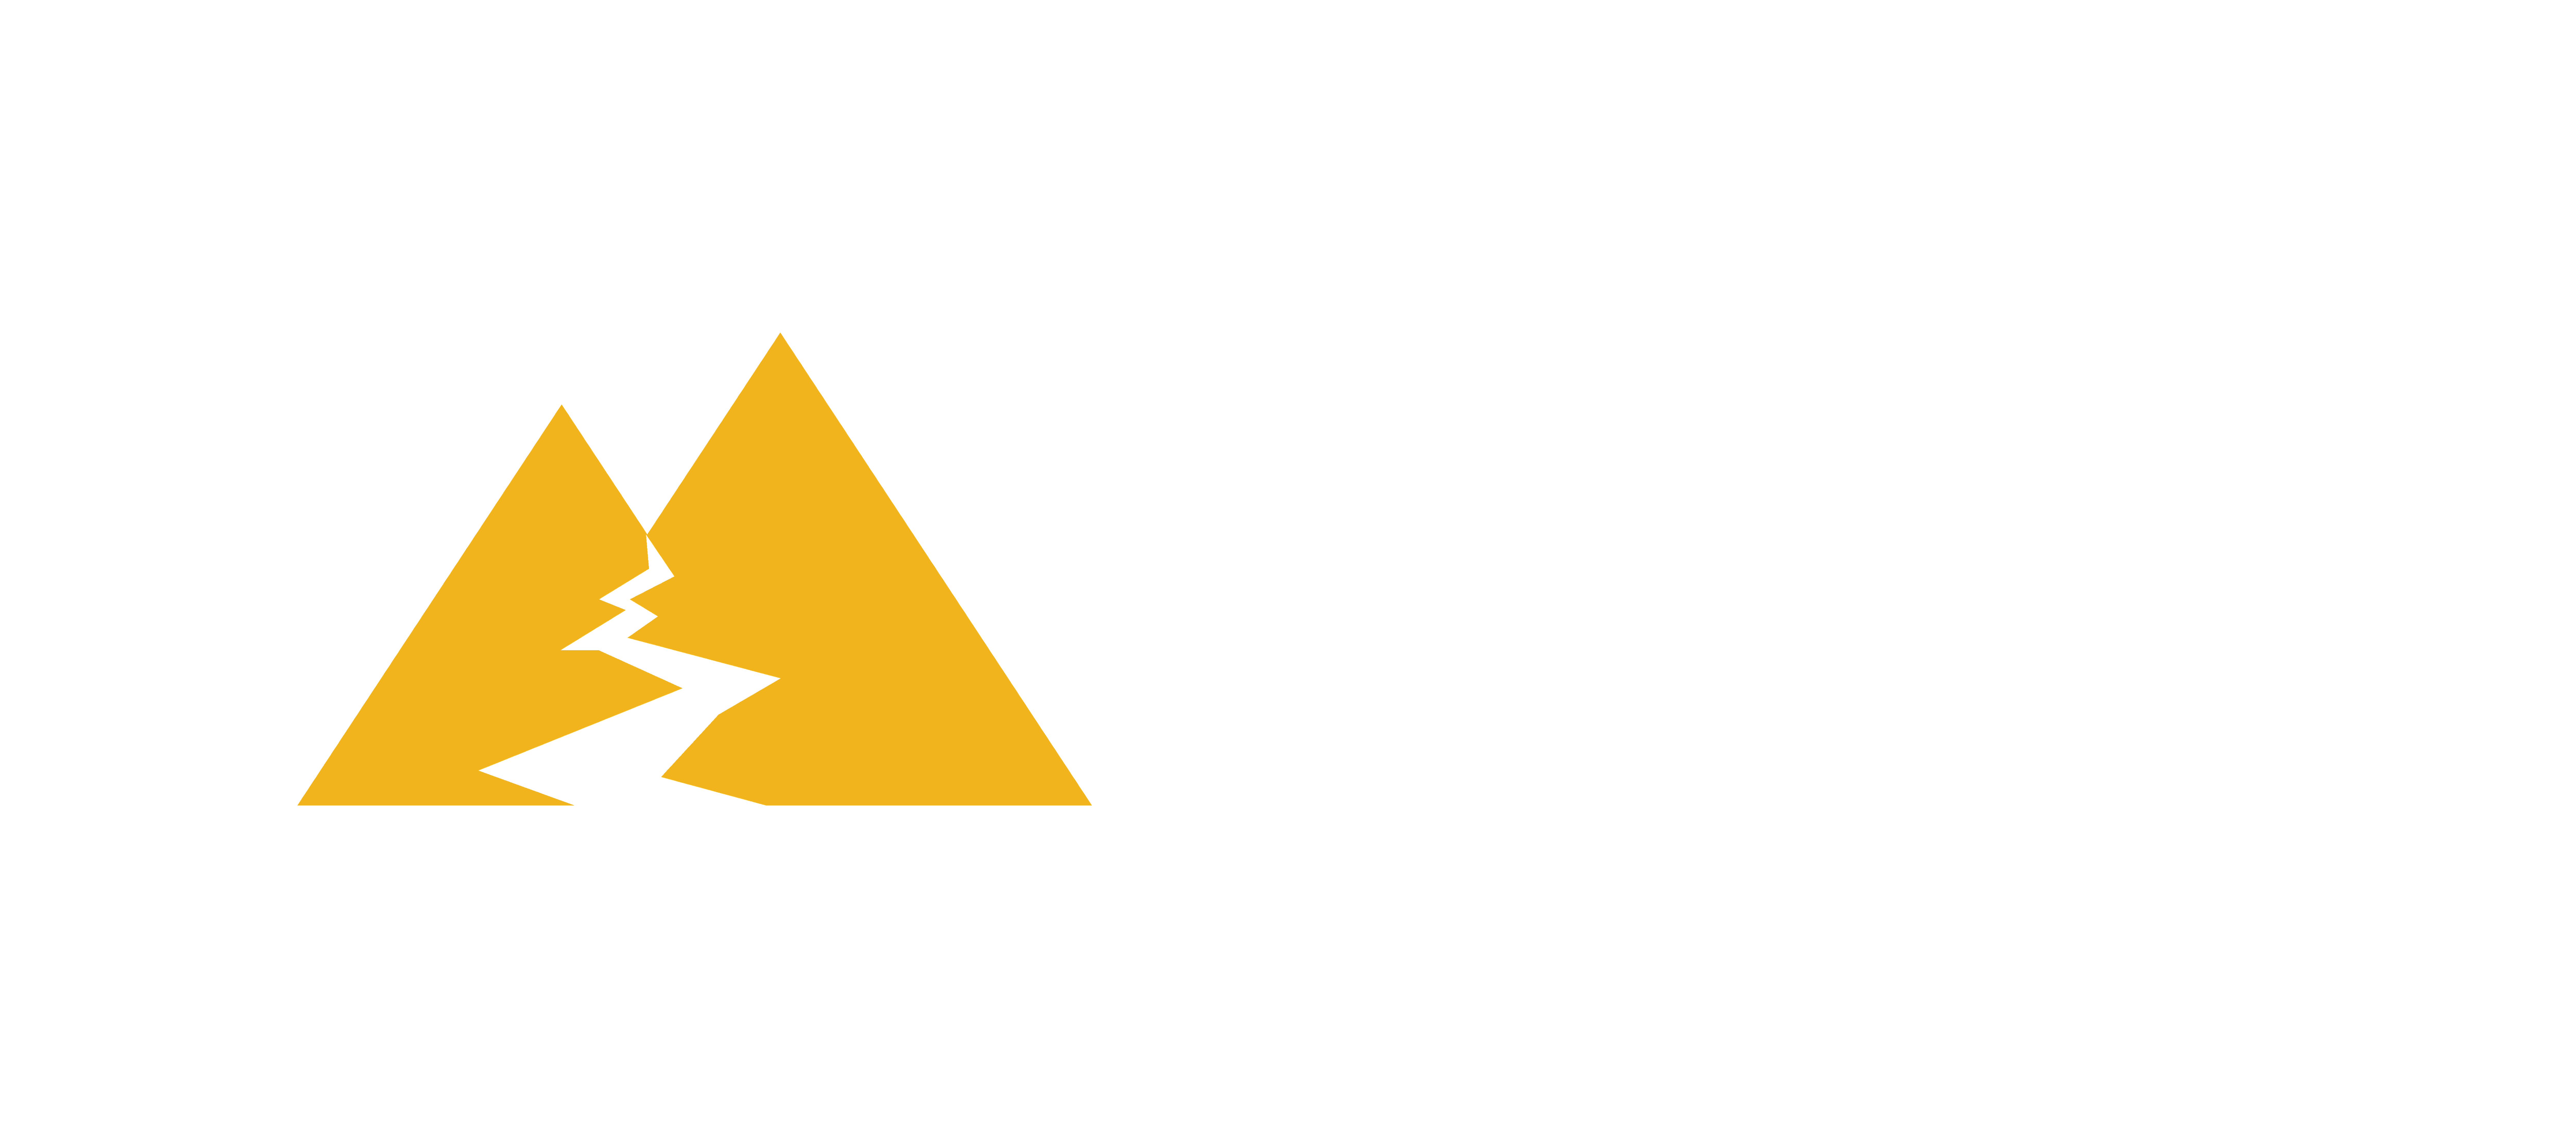 Trailbreaker Resources Ltd. | Canadian-based mining exploration company focused on gold exploration in North America